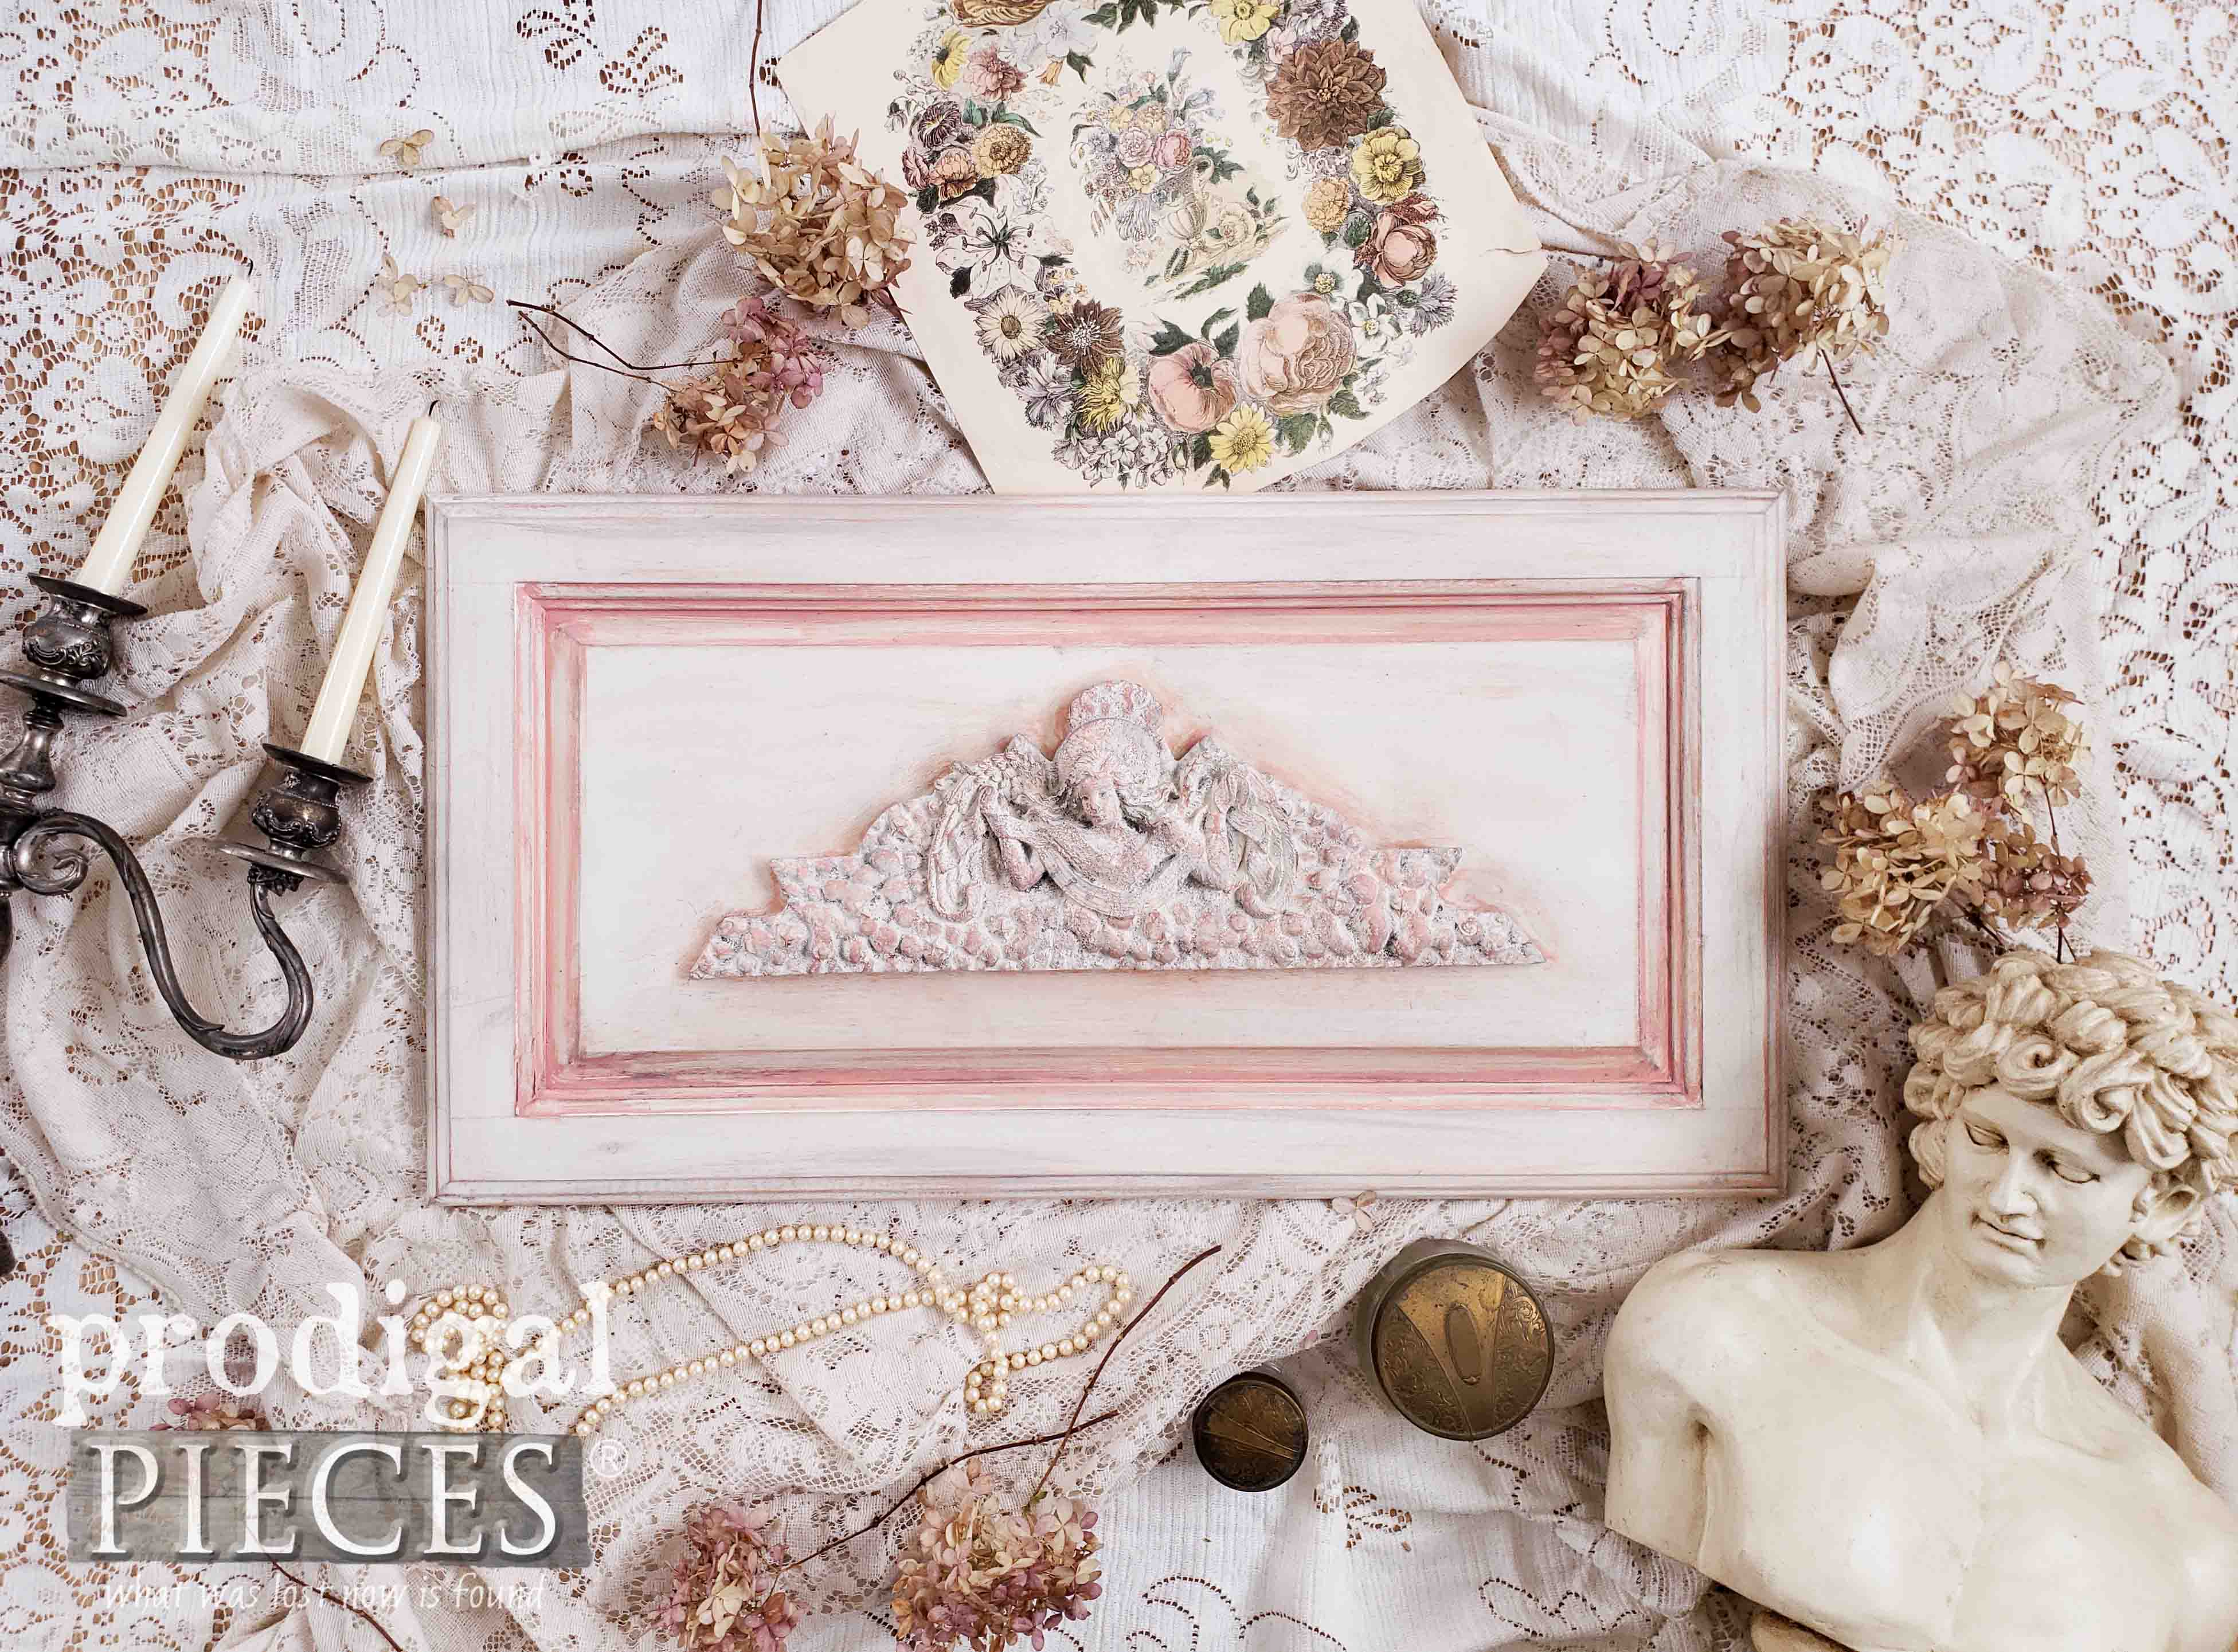 Vintage French Relief Wall Art Created with Upcycled Thrift Store Finds by Larissa of Prodigal Pieces | prodigalpieces.com #prodigalpieces #diy #handmade #home #shopping #homedecor #shabbychic #homedecorideas #videos